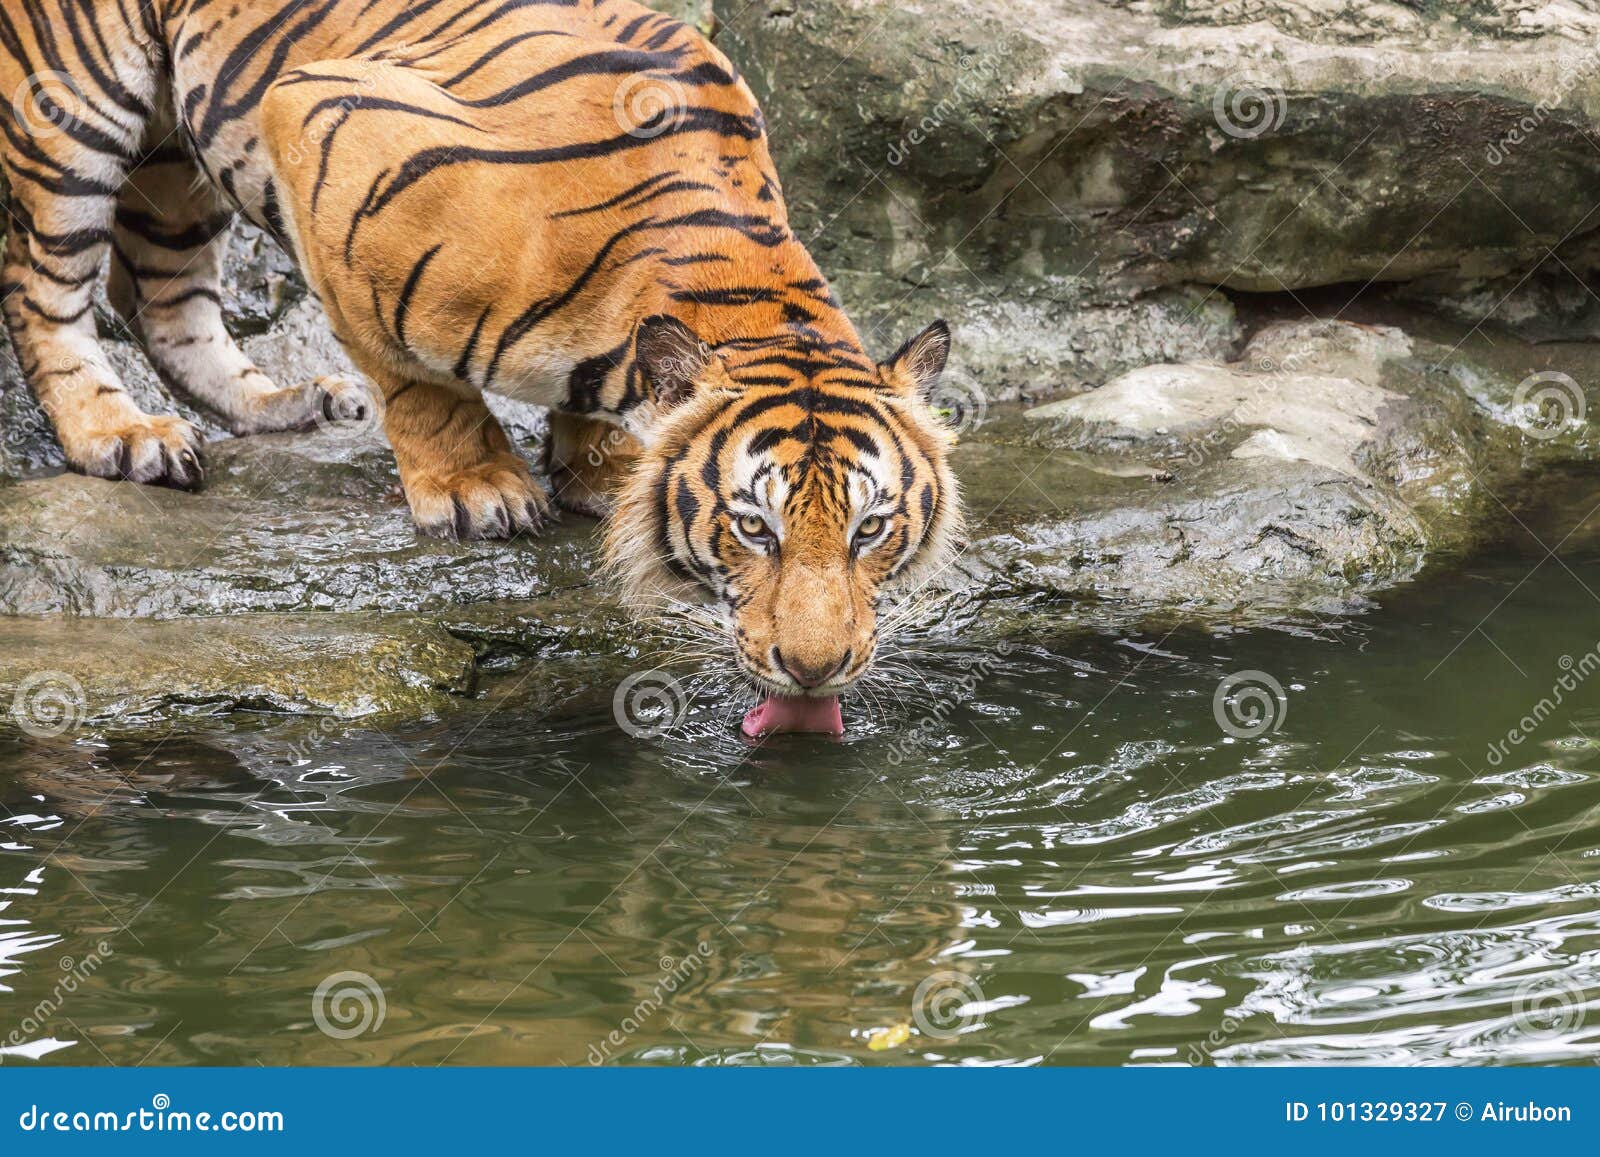 cloe up bengal tiger be thirsty crouch drinking water